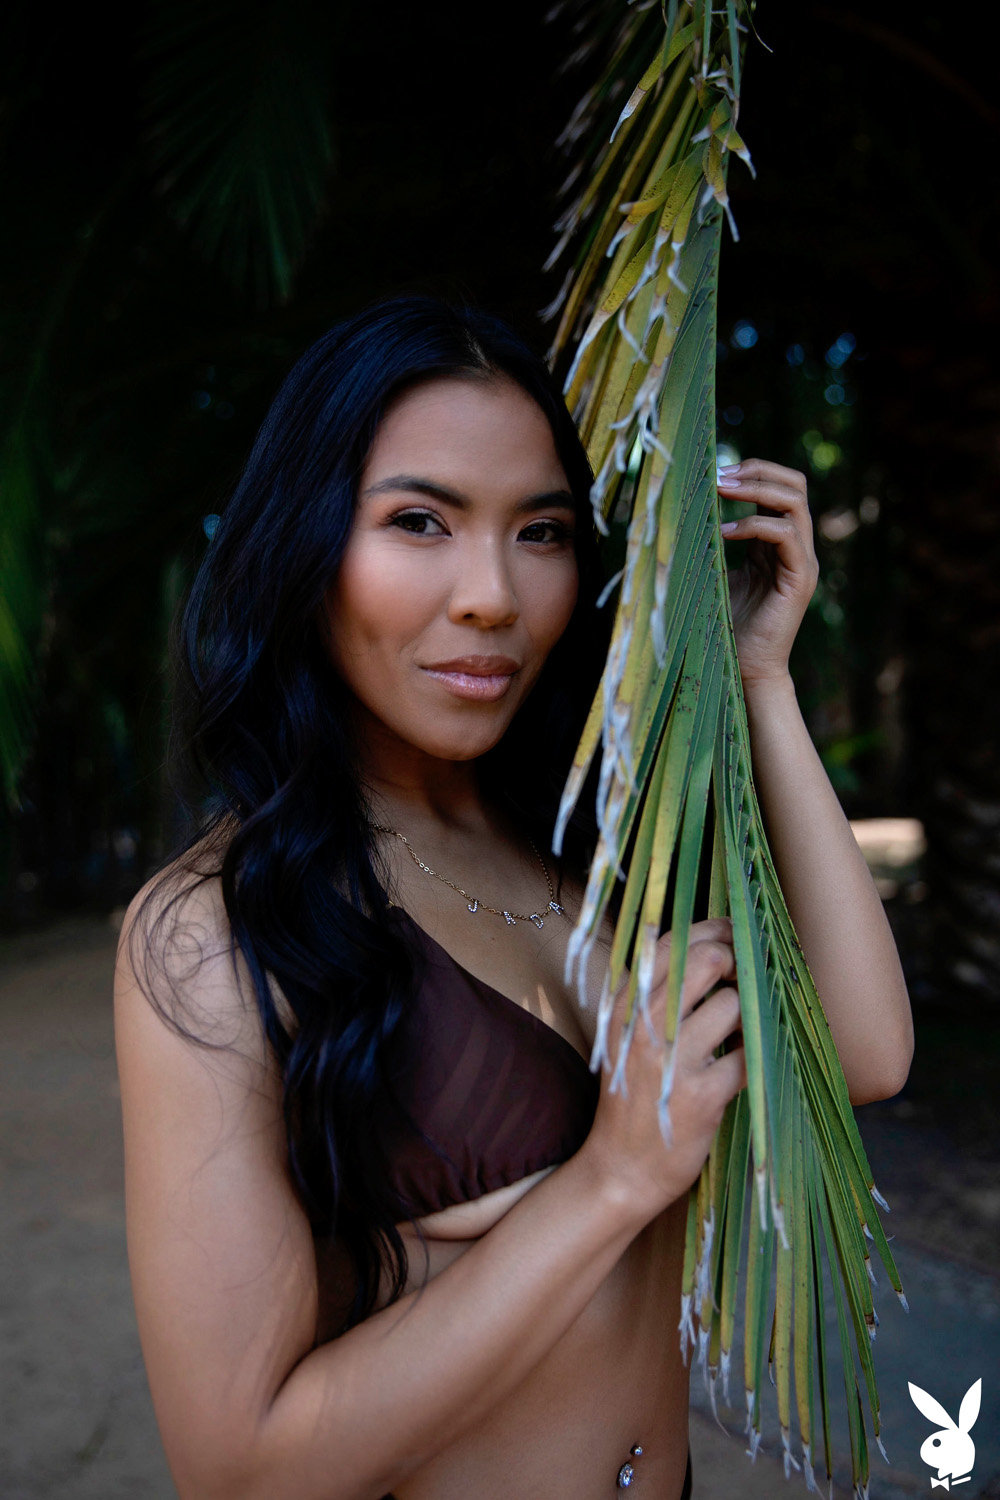 Jada Kai exposes her sexy curves surrounded by palm trees